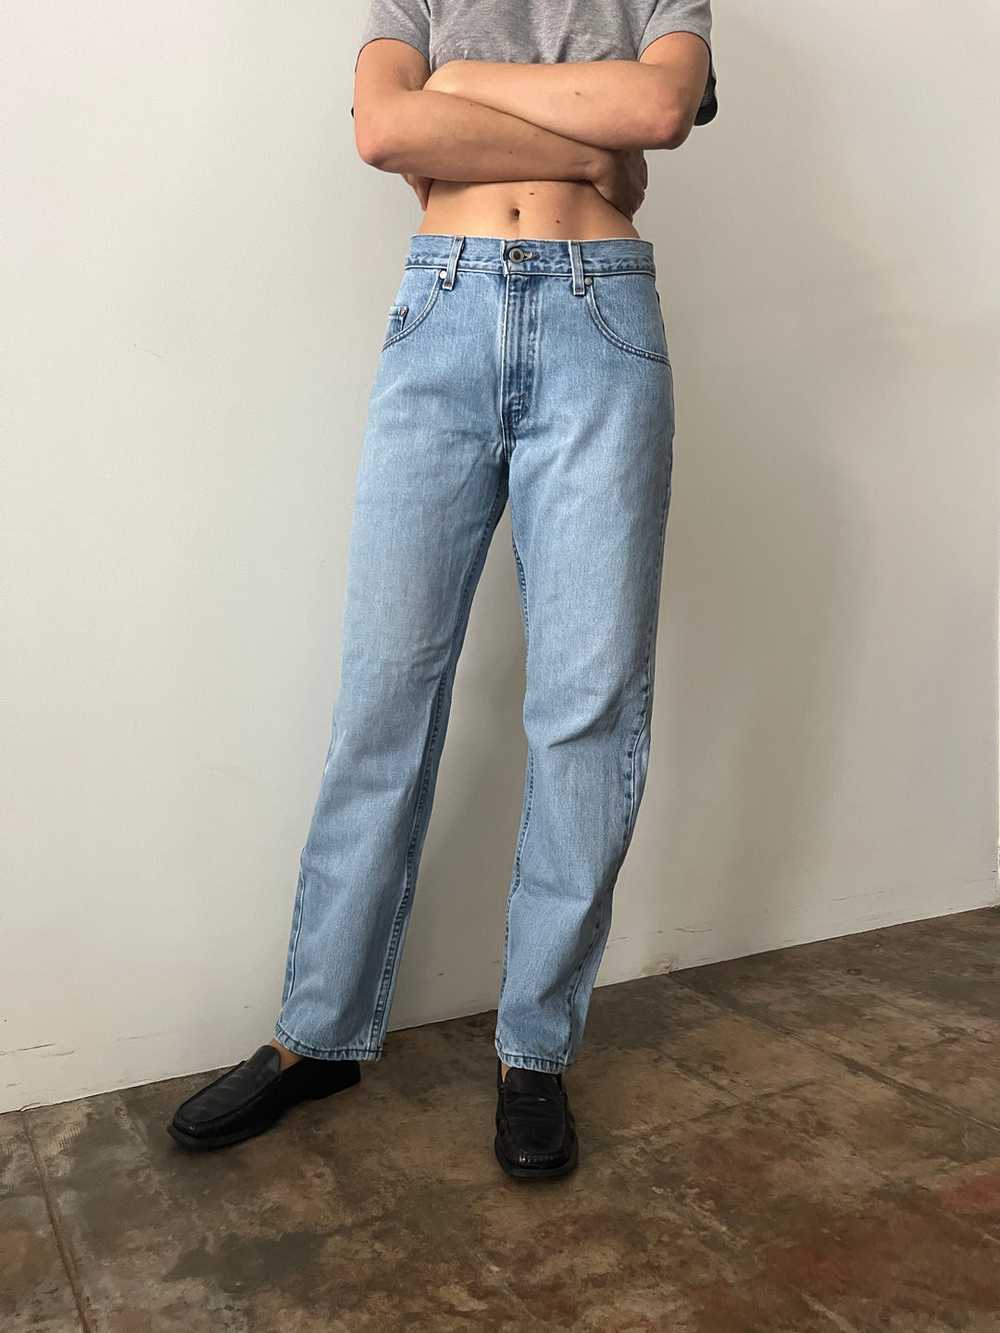 90s Levis Silvertab Jeans - image 1